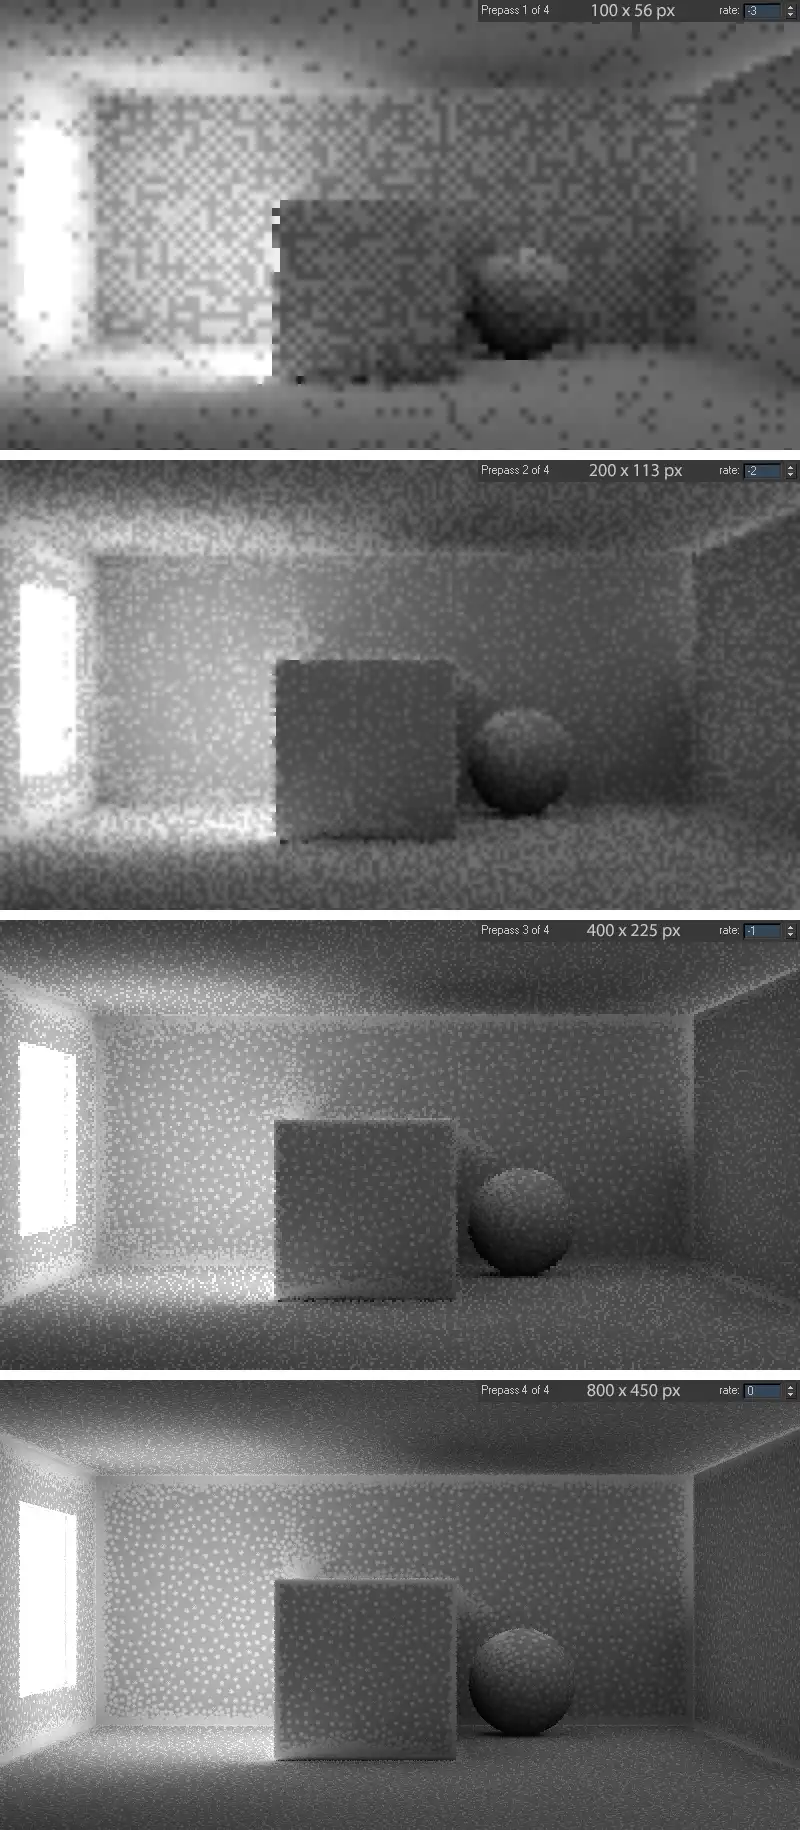 Four different phases of Irradiance map rendering process to see distribution of IM samples at different resolutions.